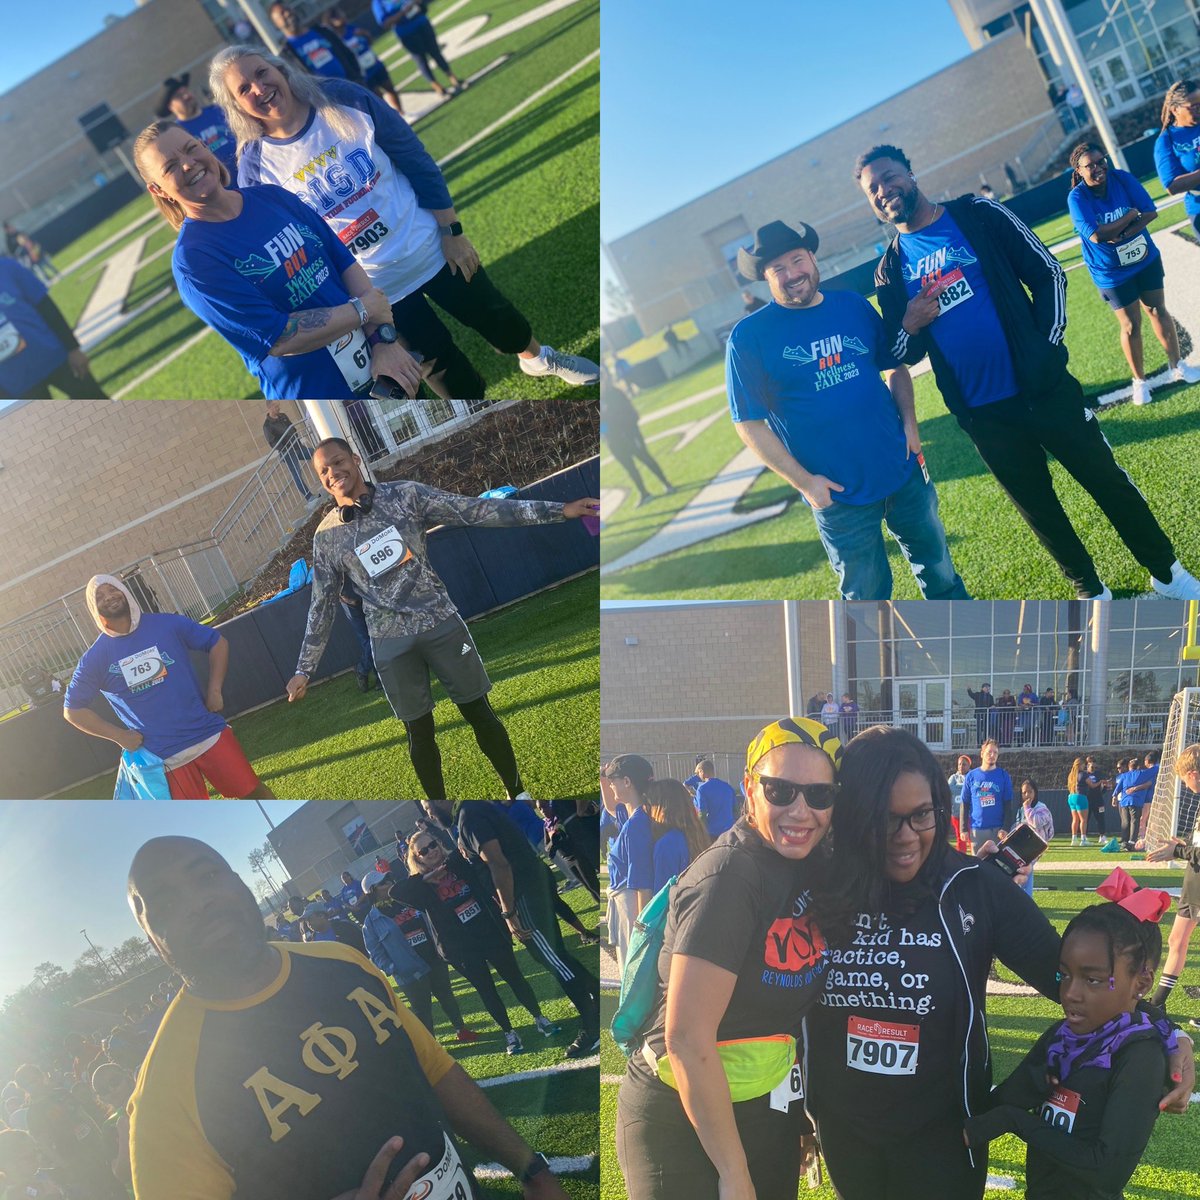 More pics from our @SpringISD @SpringISDHR1 #FunRun2023 and #WellnessFair2023. #OurHealthMatters #Wellness